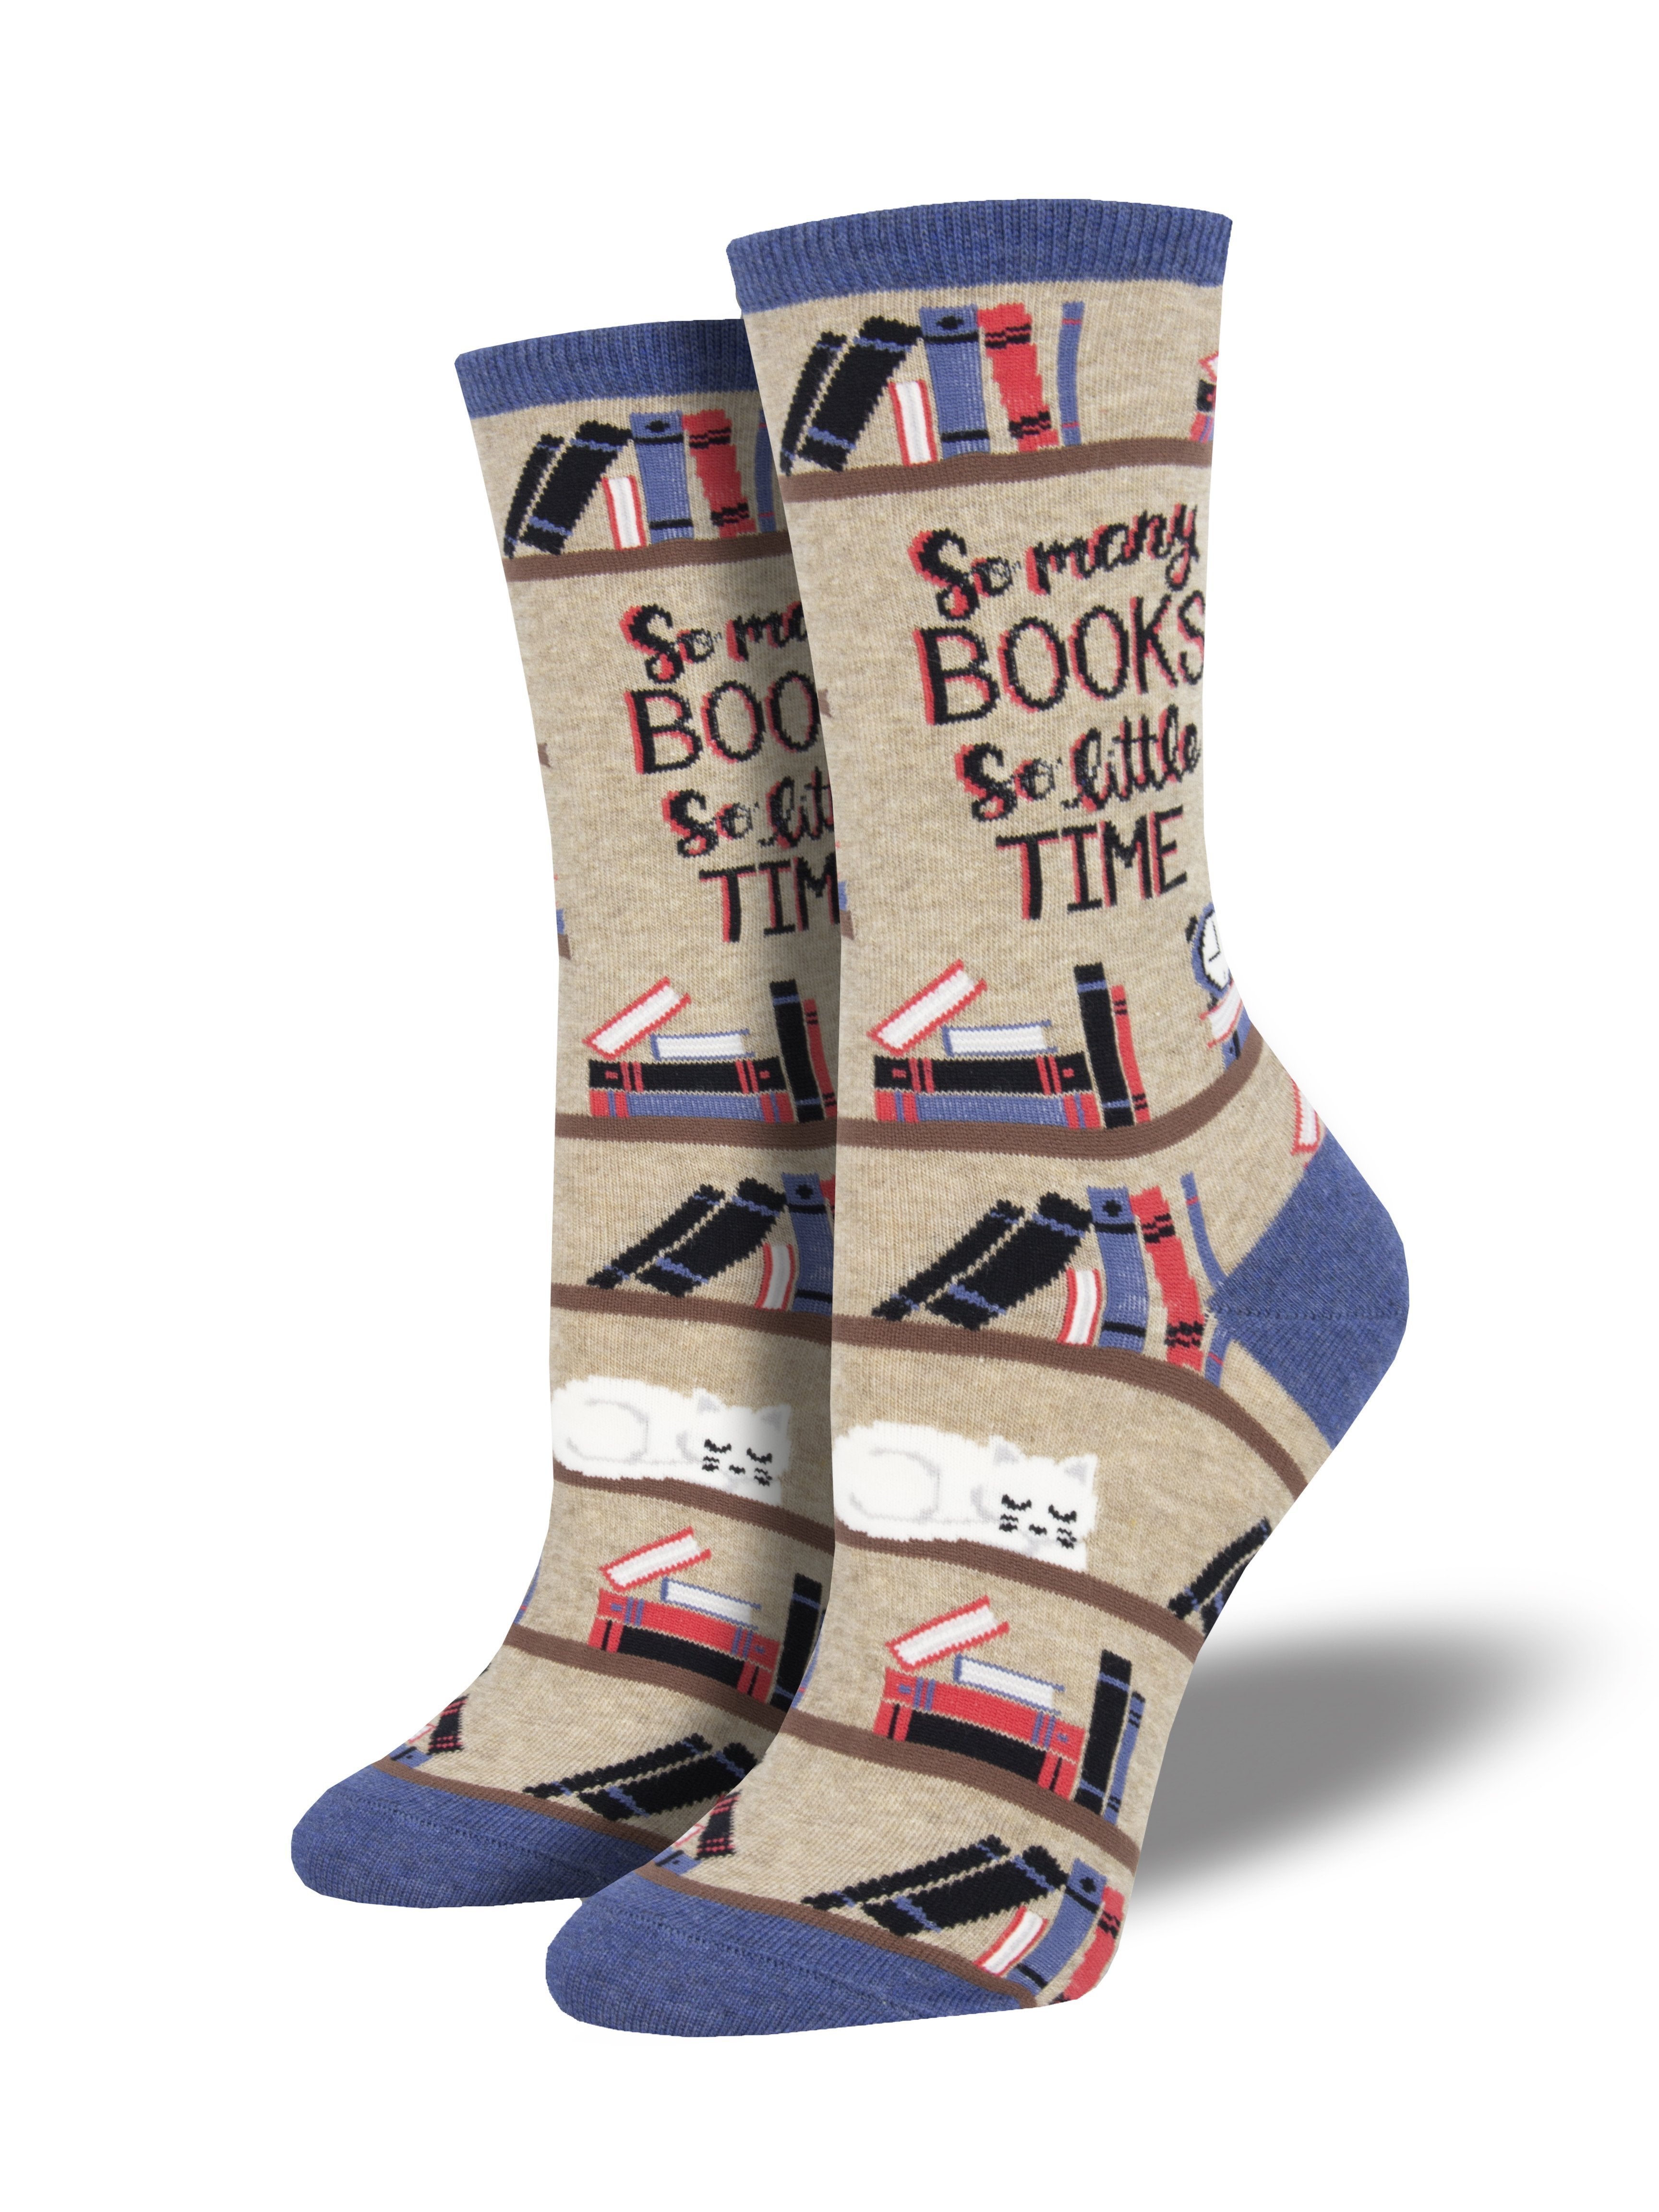 Women's "Time For A Good Book" Socks